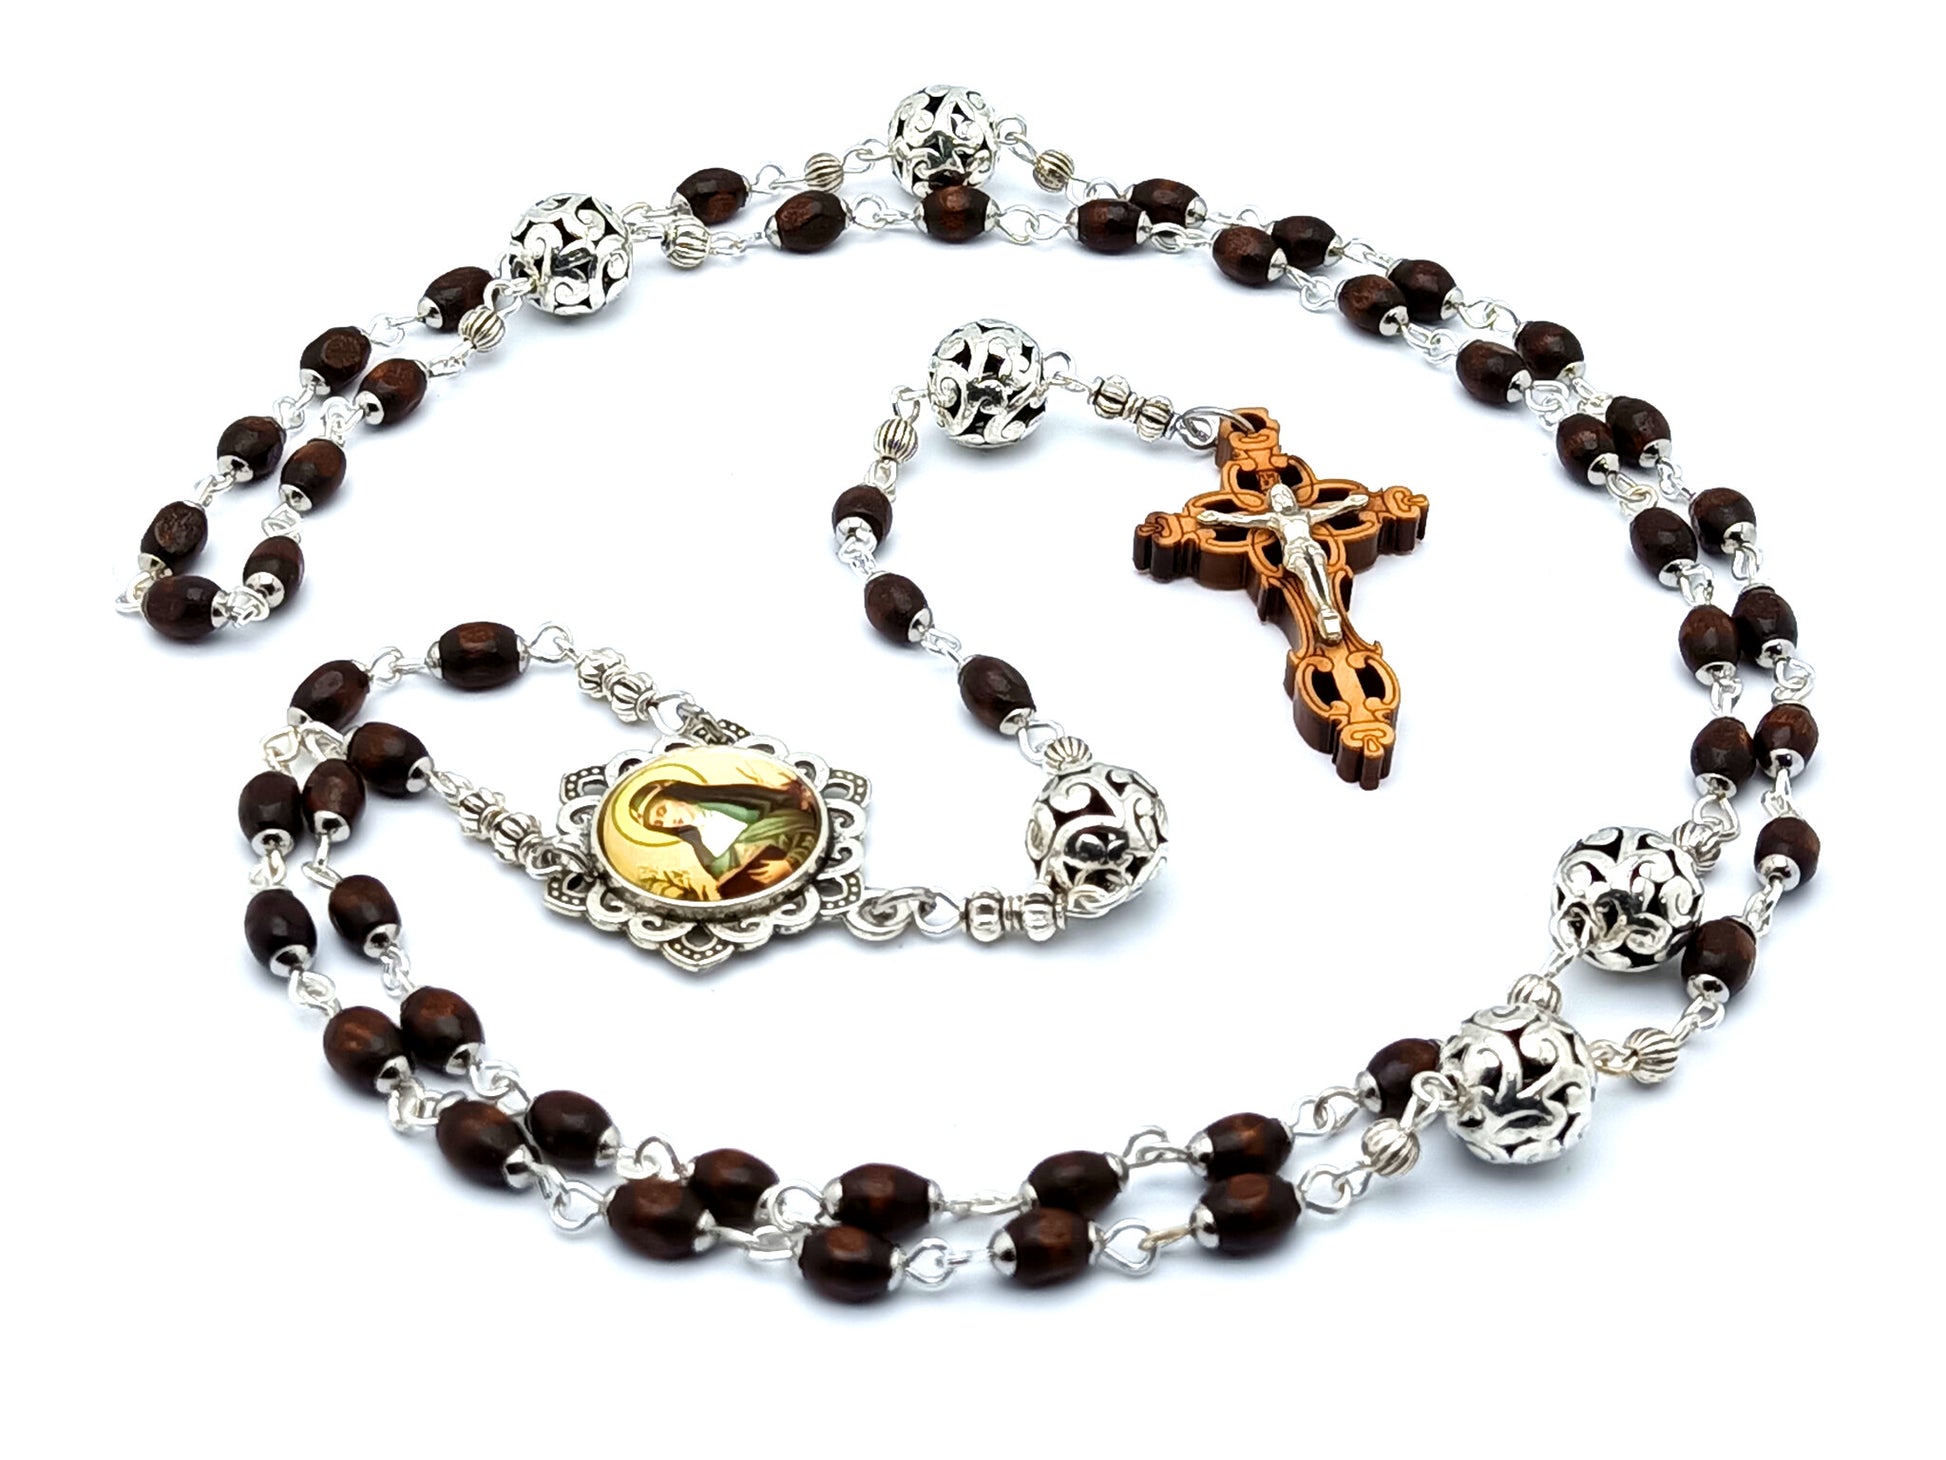 Saint Bridget of Sweden unique rosary beads with wooden beads and olive wood laser cut crucifix and silver corpus.